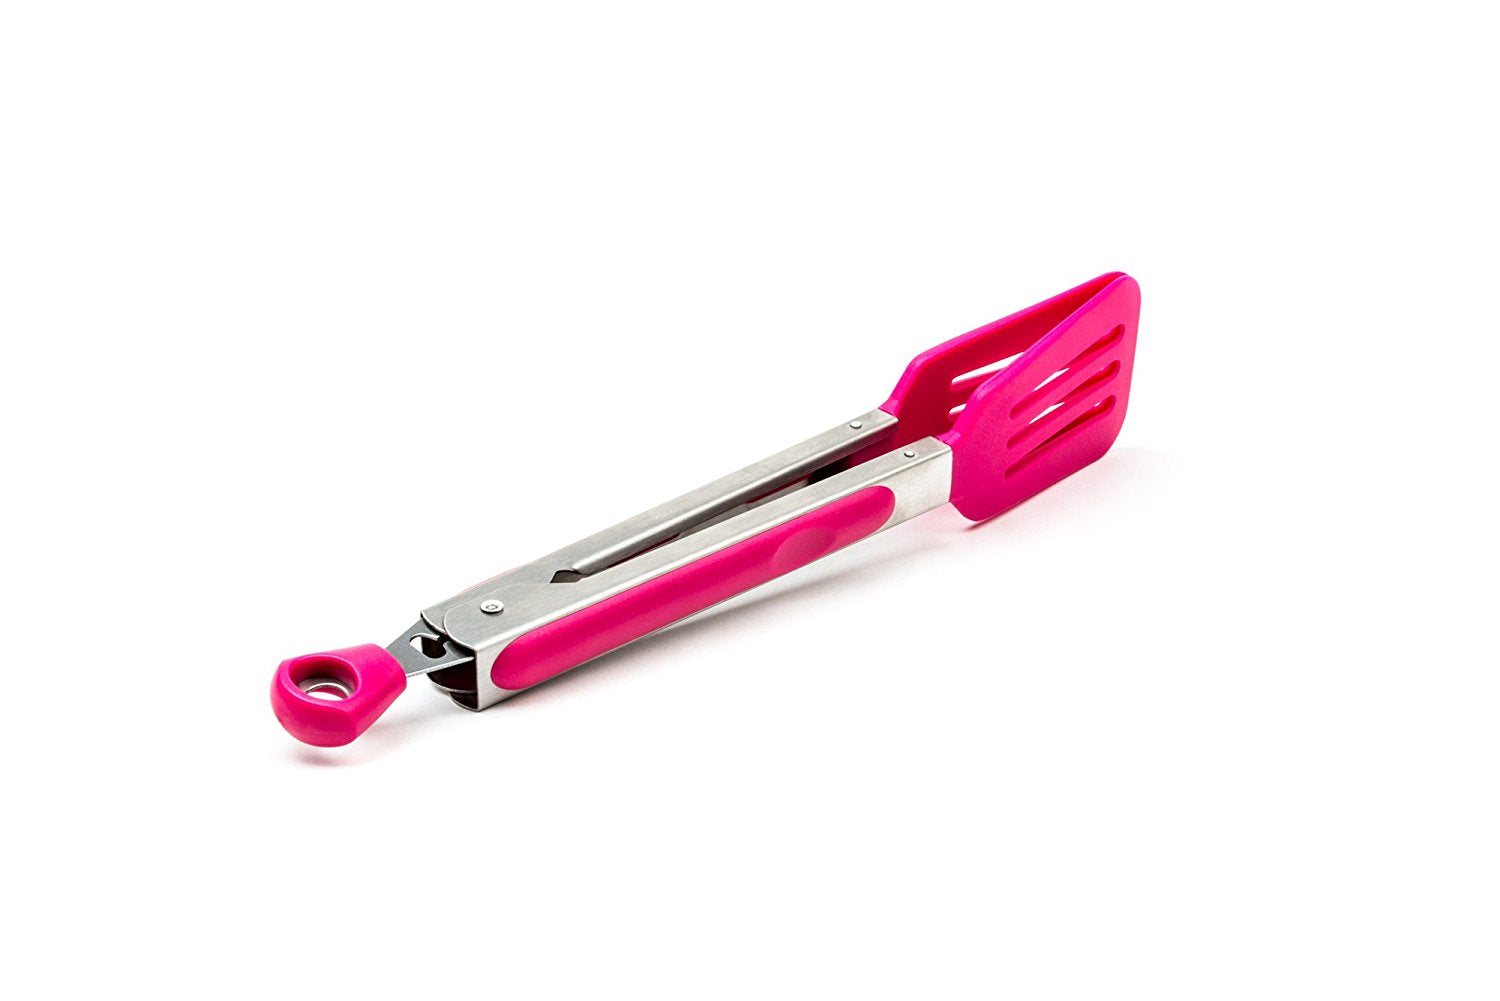 Stainless Steel and Silicone Locking Turner Tongs